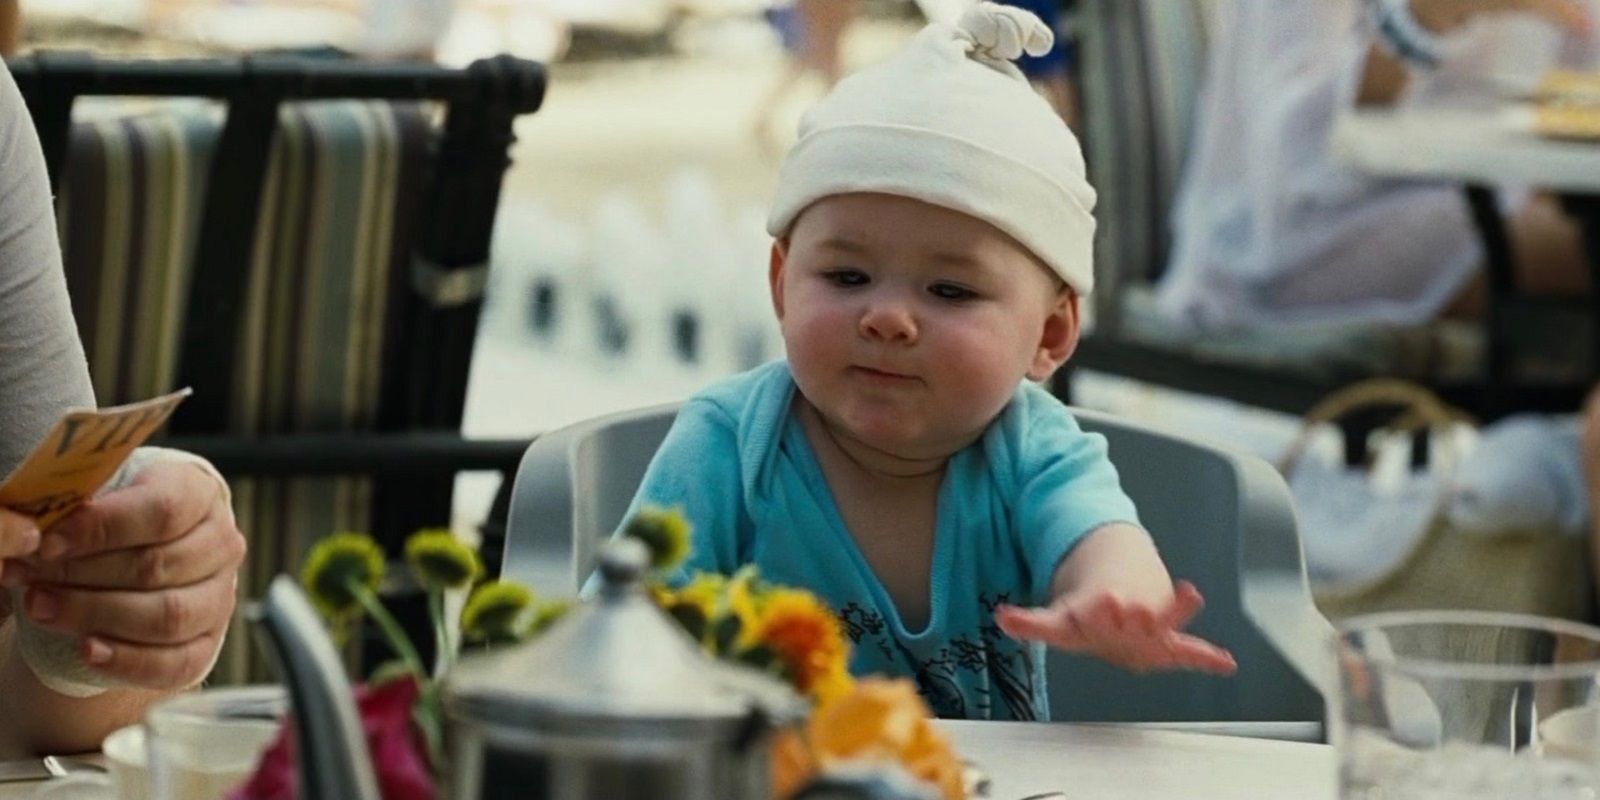 Carlos the baby sitting at a table in The Hangover